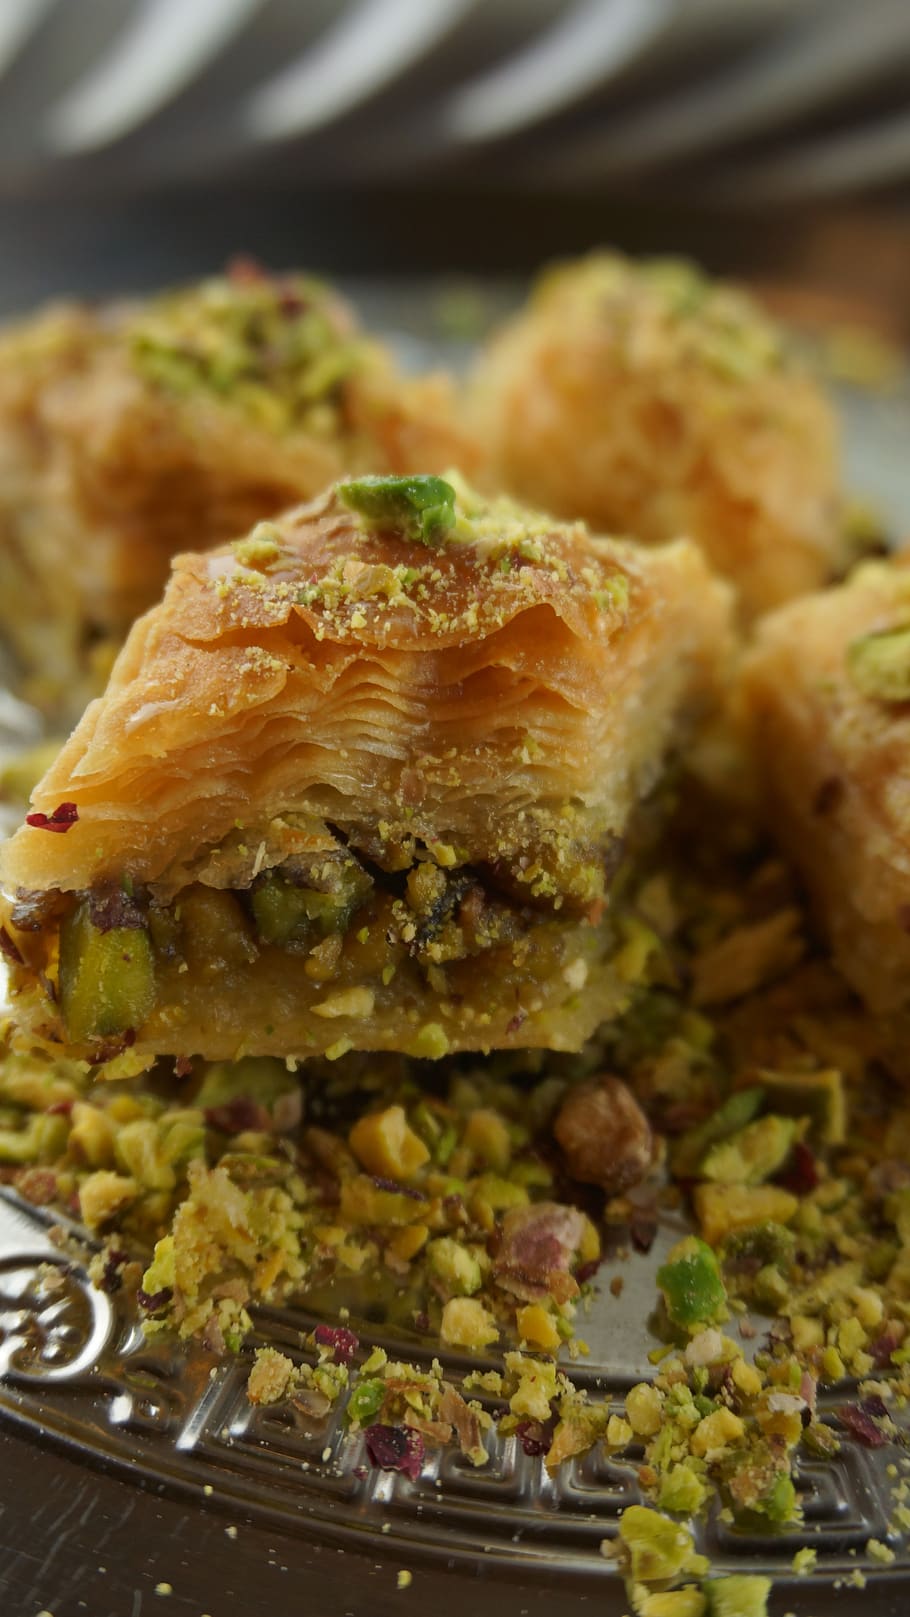 baklava-pastries, oriental kitchen, sweet pastries, food and drink, food, ready-to-eat, freshness, indoors, close-up, plate